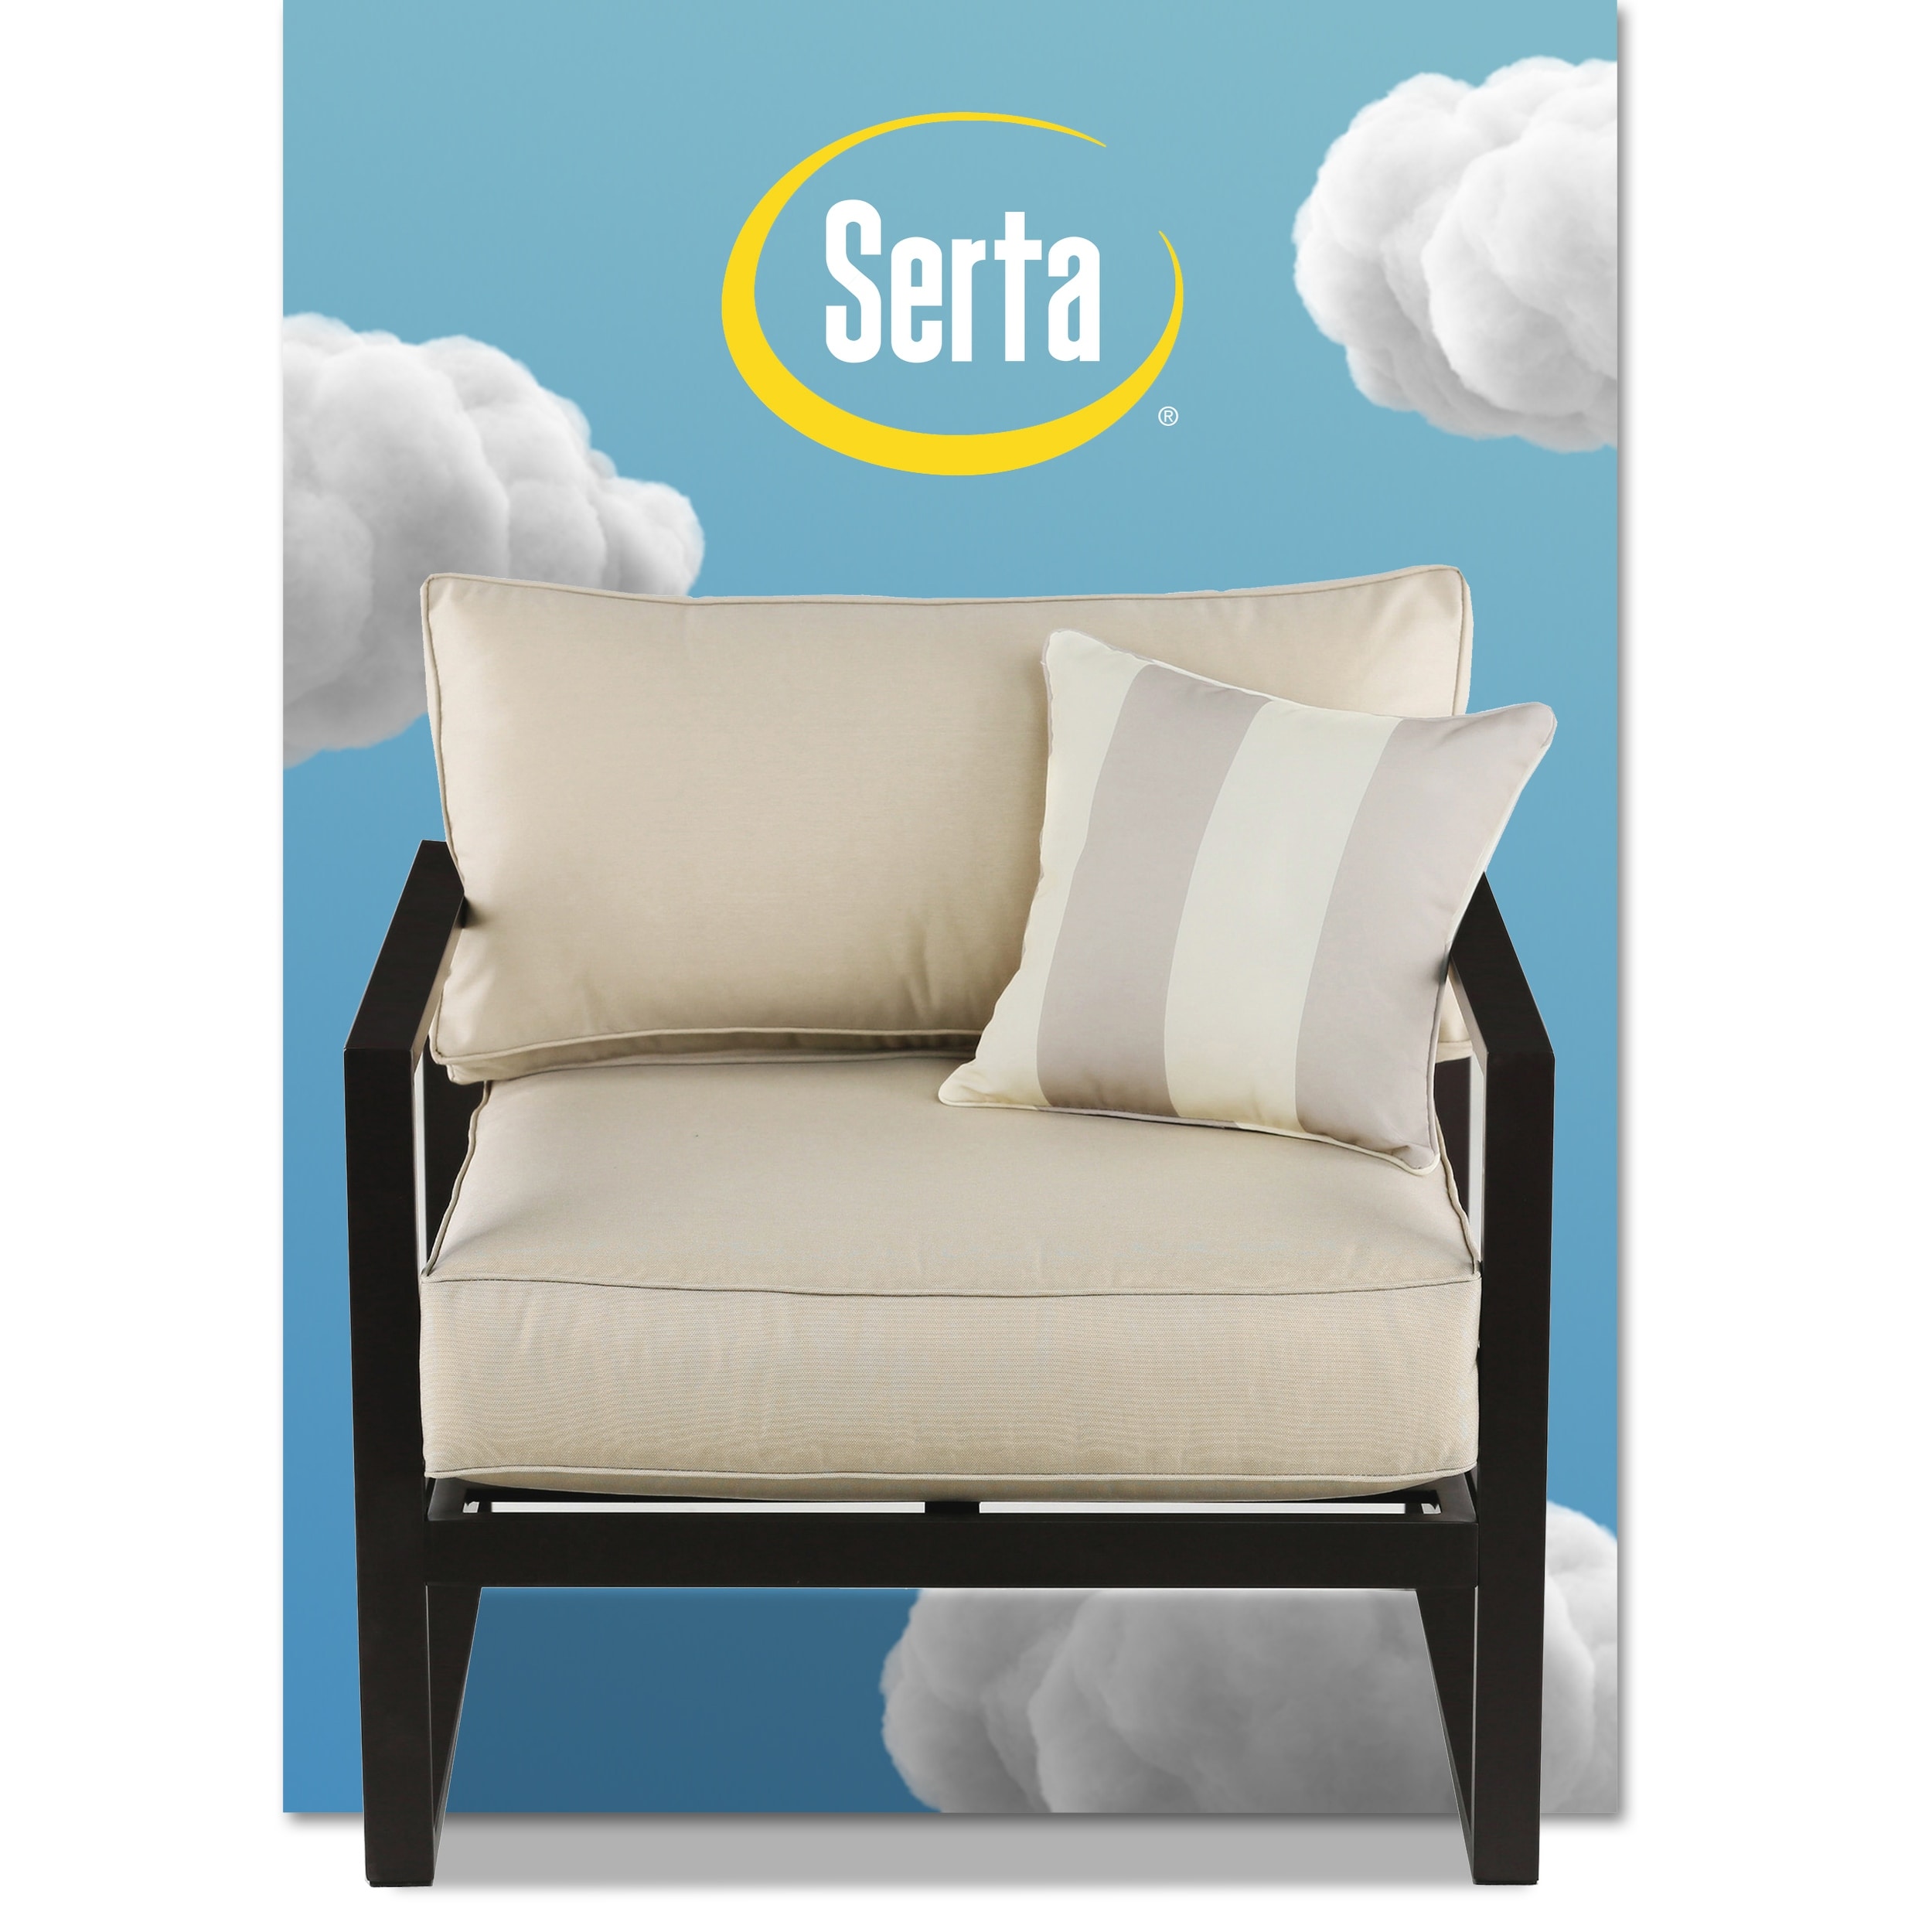 Serta Catalina Outdoor Arm Chair With Bronze Metal Frame Finish